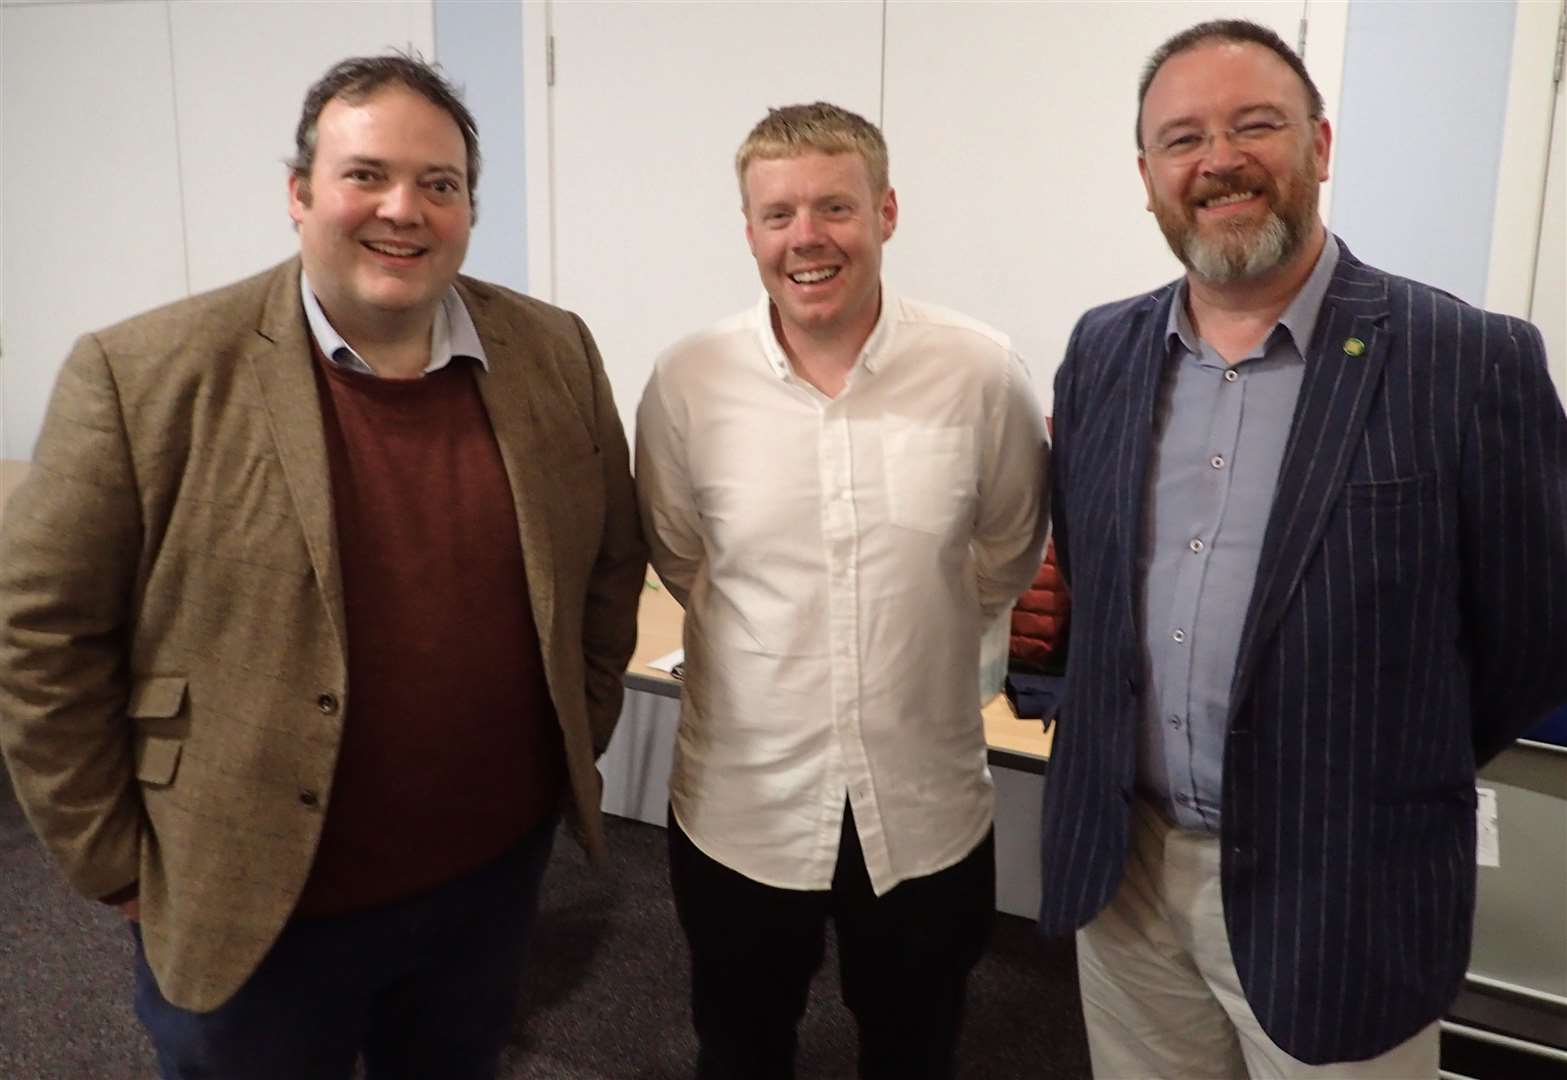 (From left) Jamie Halcro Johnston MSP, Councillor Tim Eagle and David Duguid MP at the AGM of the Moray Conservative Association in Elgin.